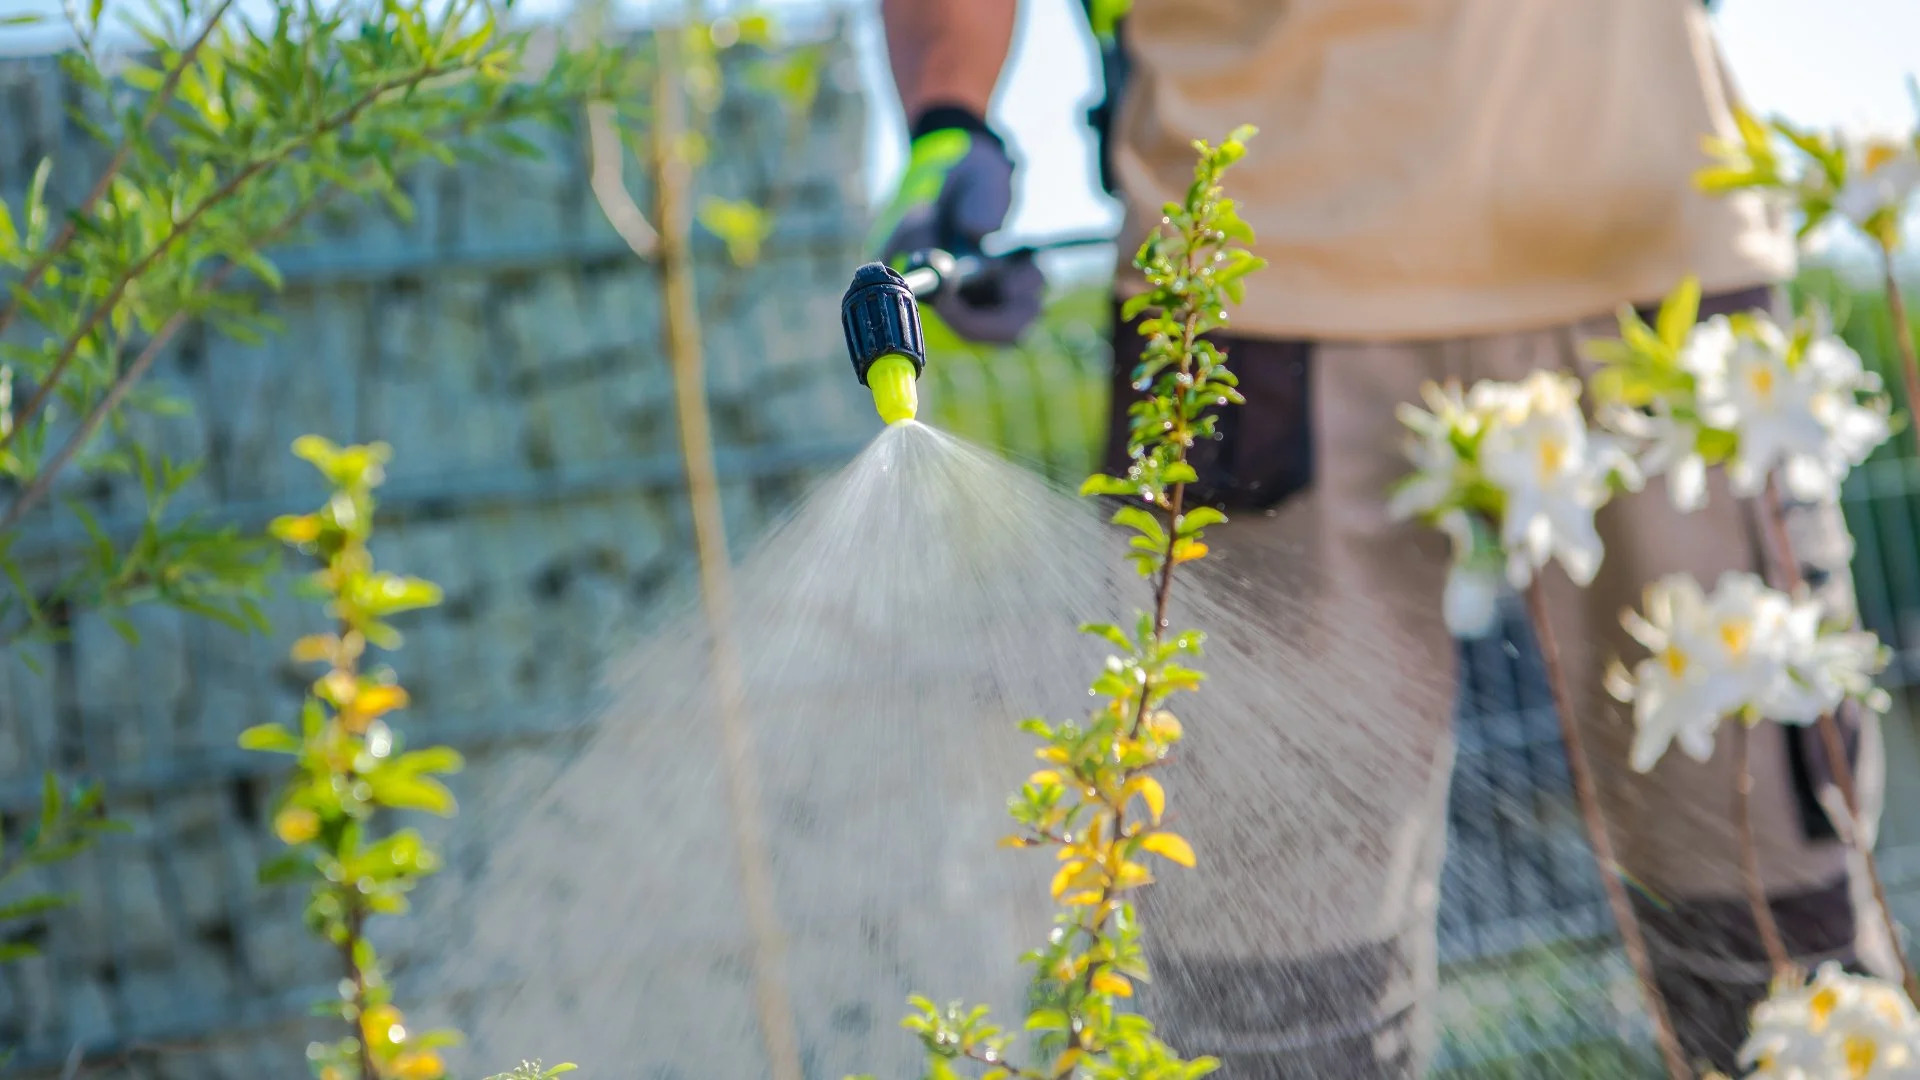 Tree & Shrub Fertilization - Here's What You Need to Know to Keep Your Plants Healthy